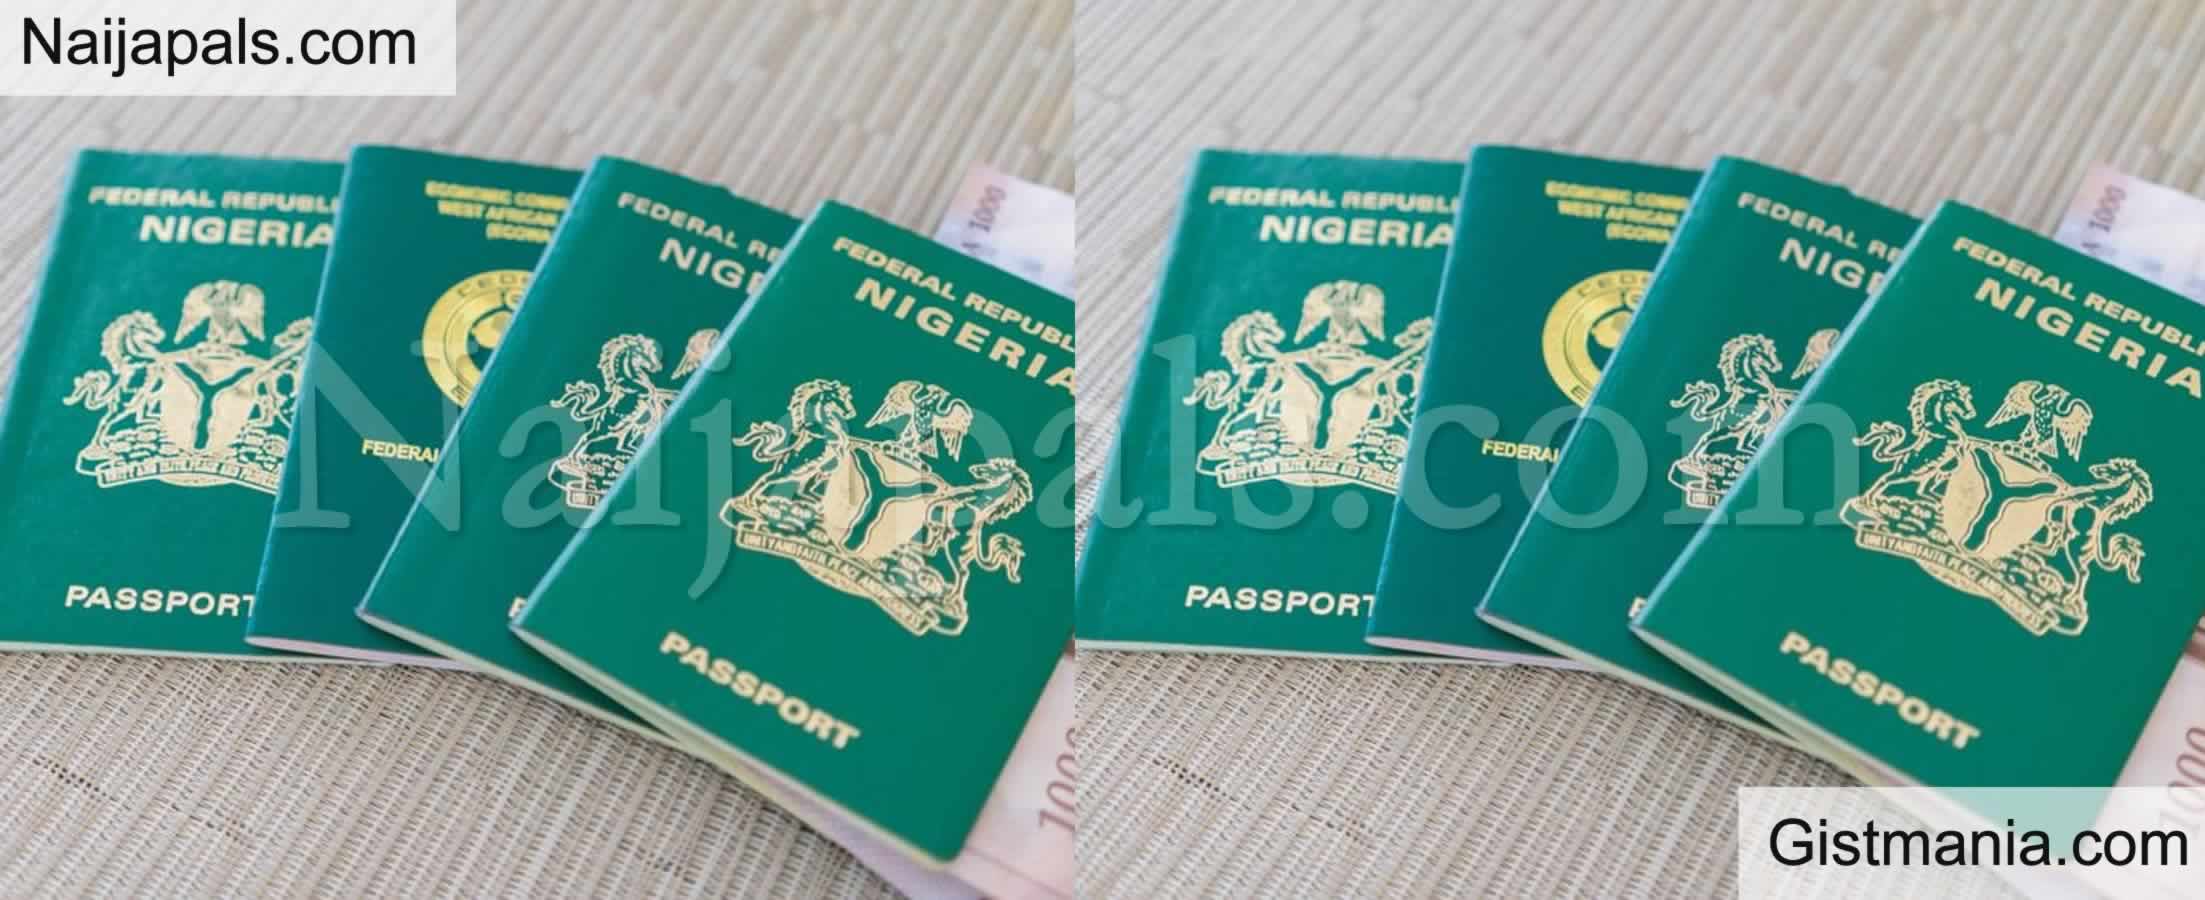 Ghana Passport Top Nigeria As Powerful Least Powerful Passport In Africa Surfaces Gistmania